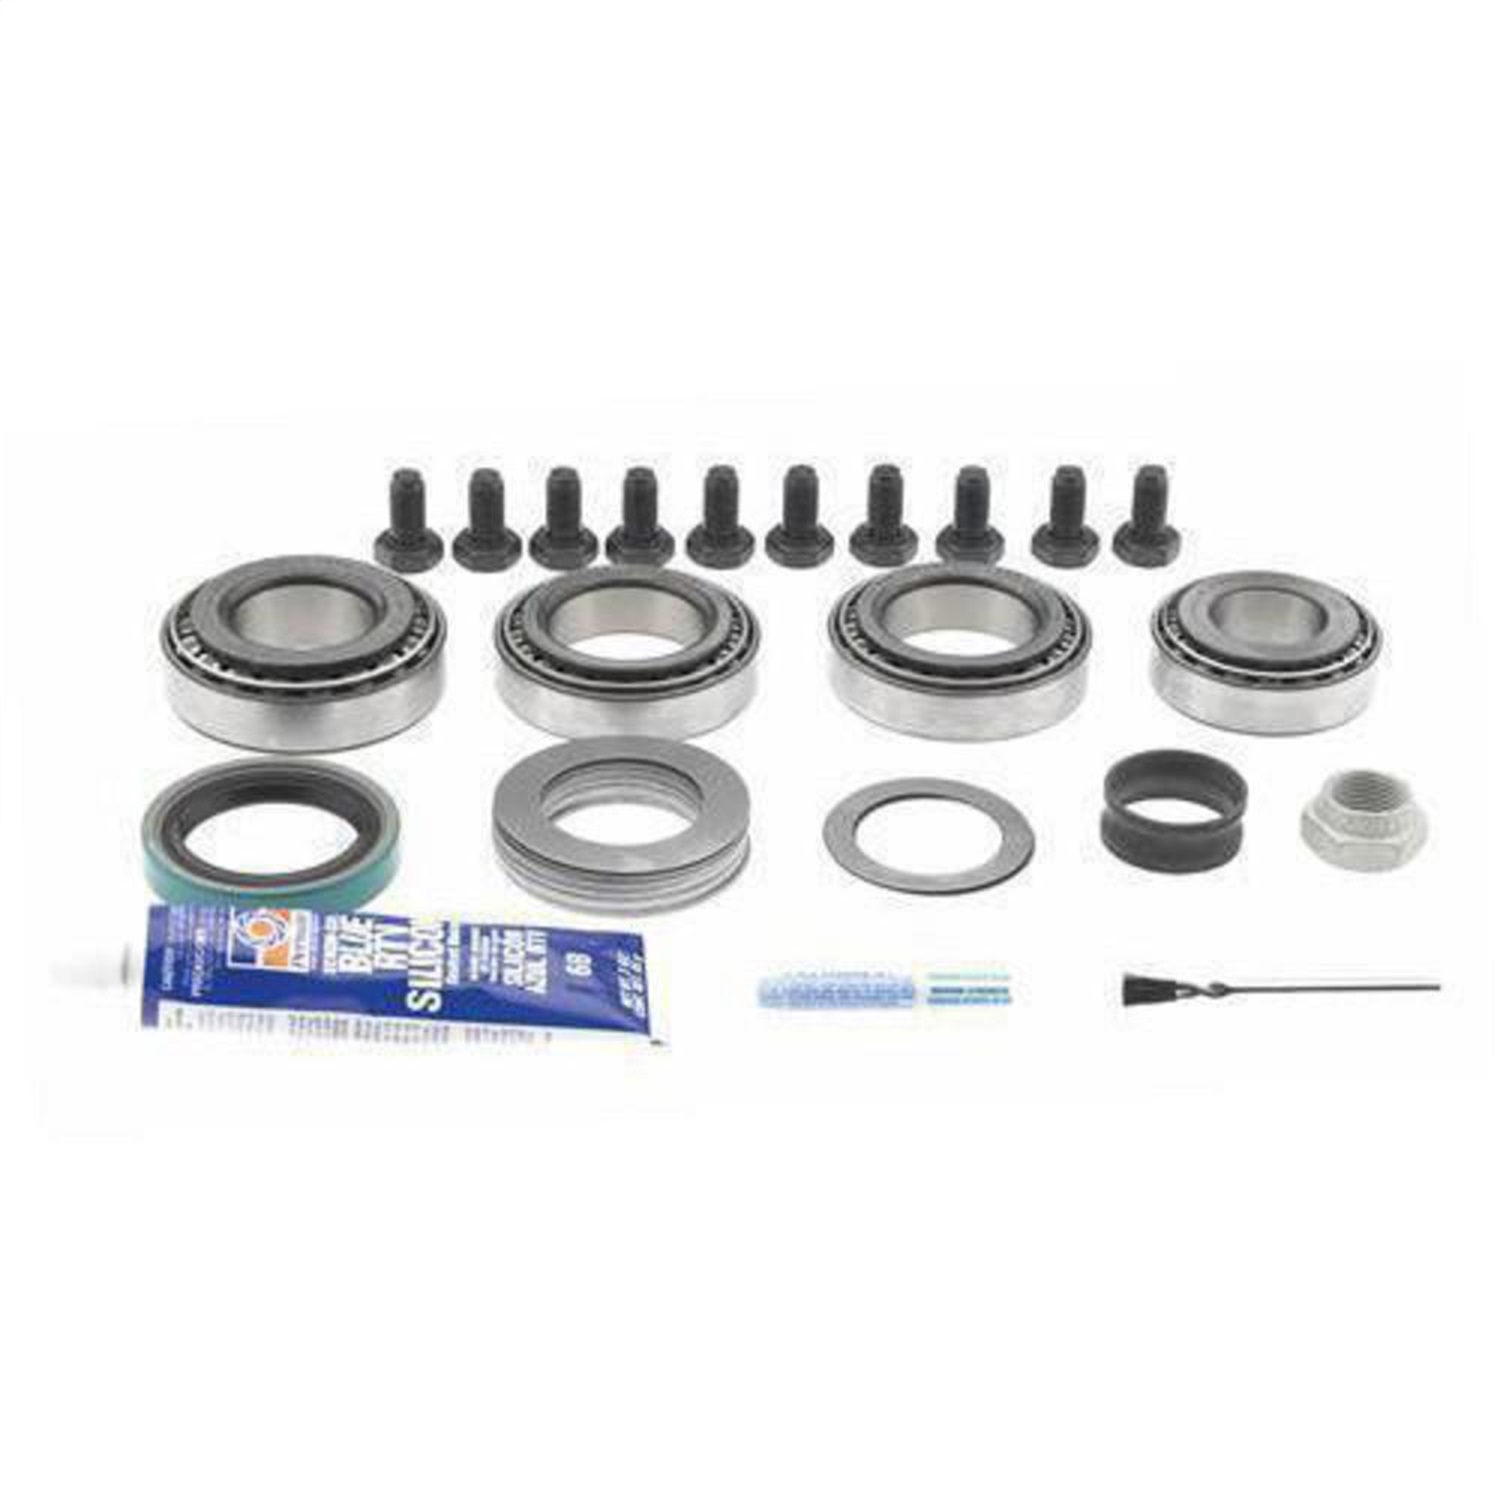 G2 Axle and Gear 35-2042 Ring And Pinion Master Install Kit Fits 4Runner Pickup